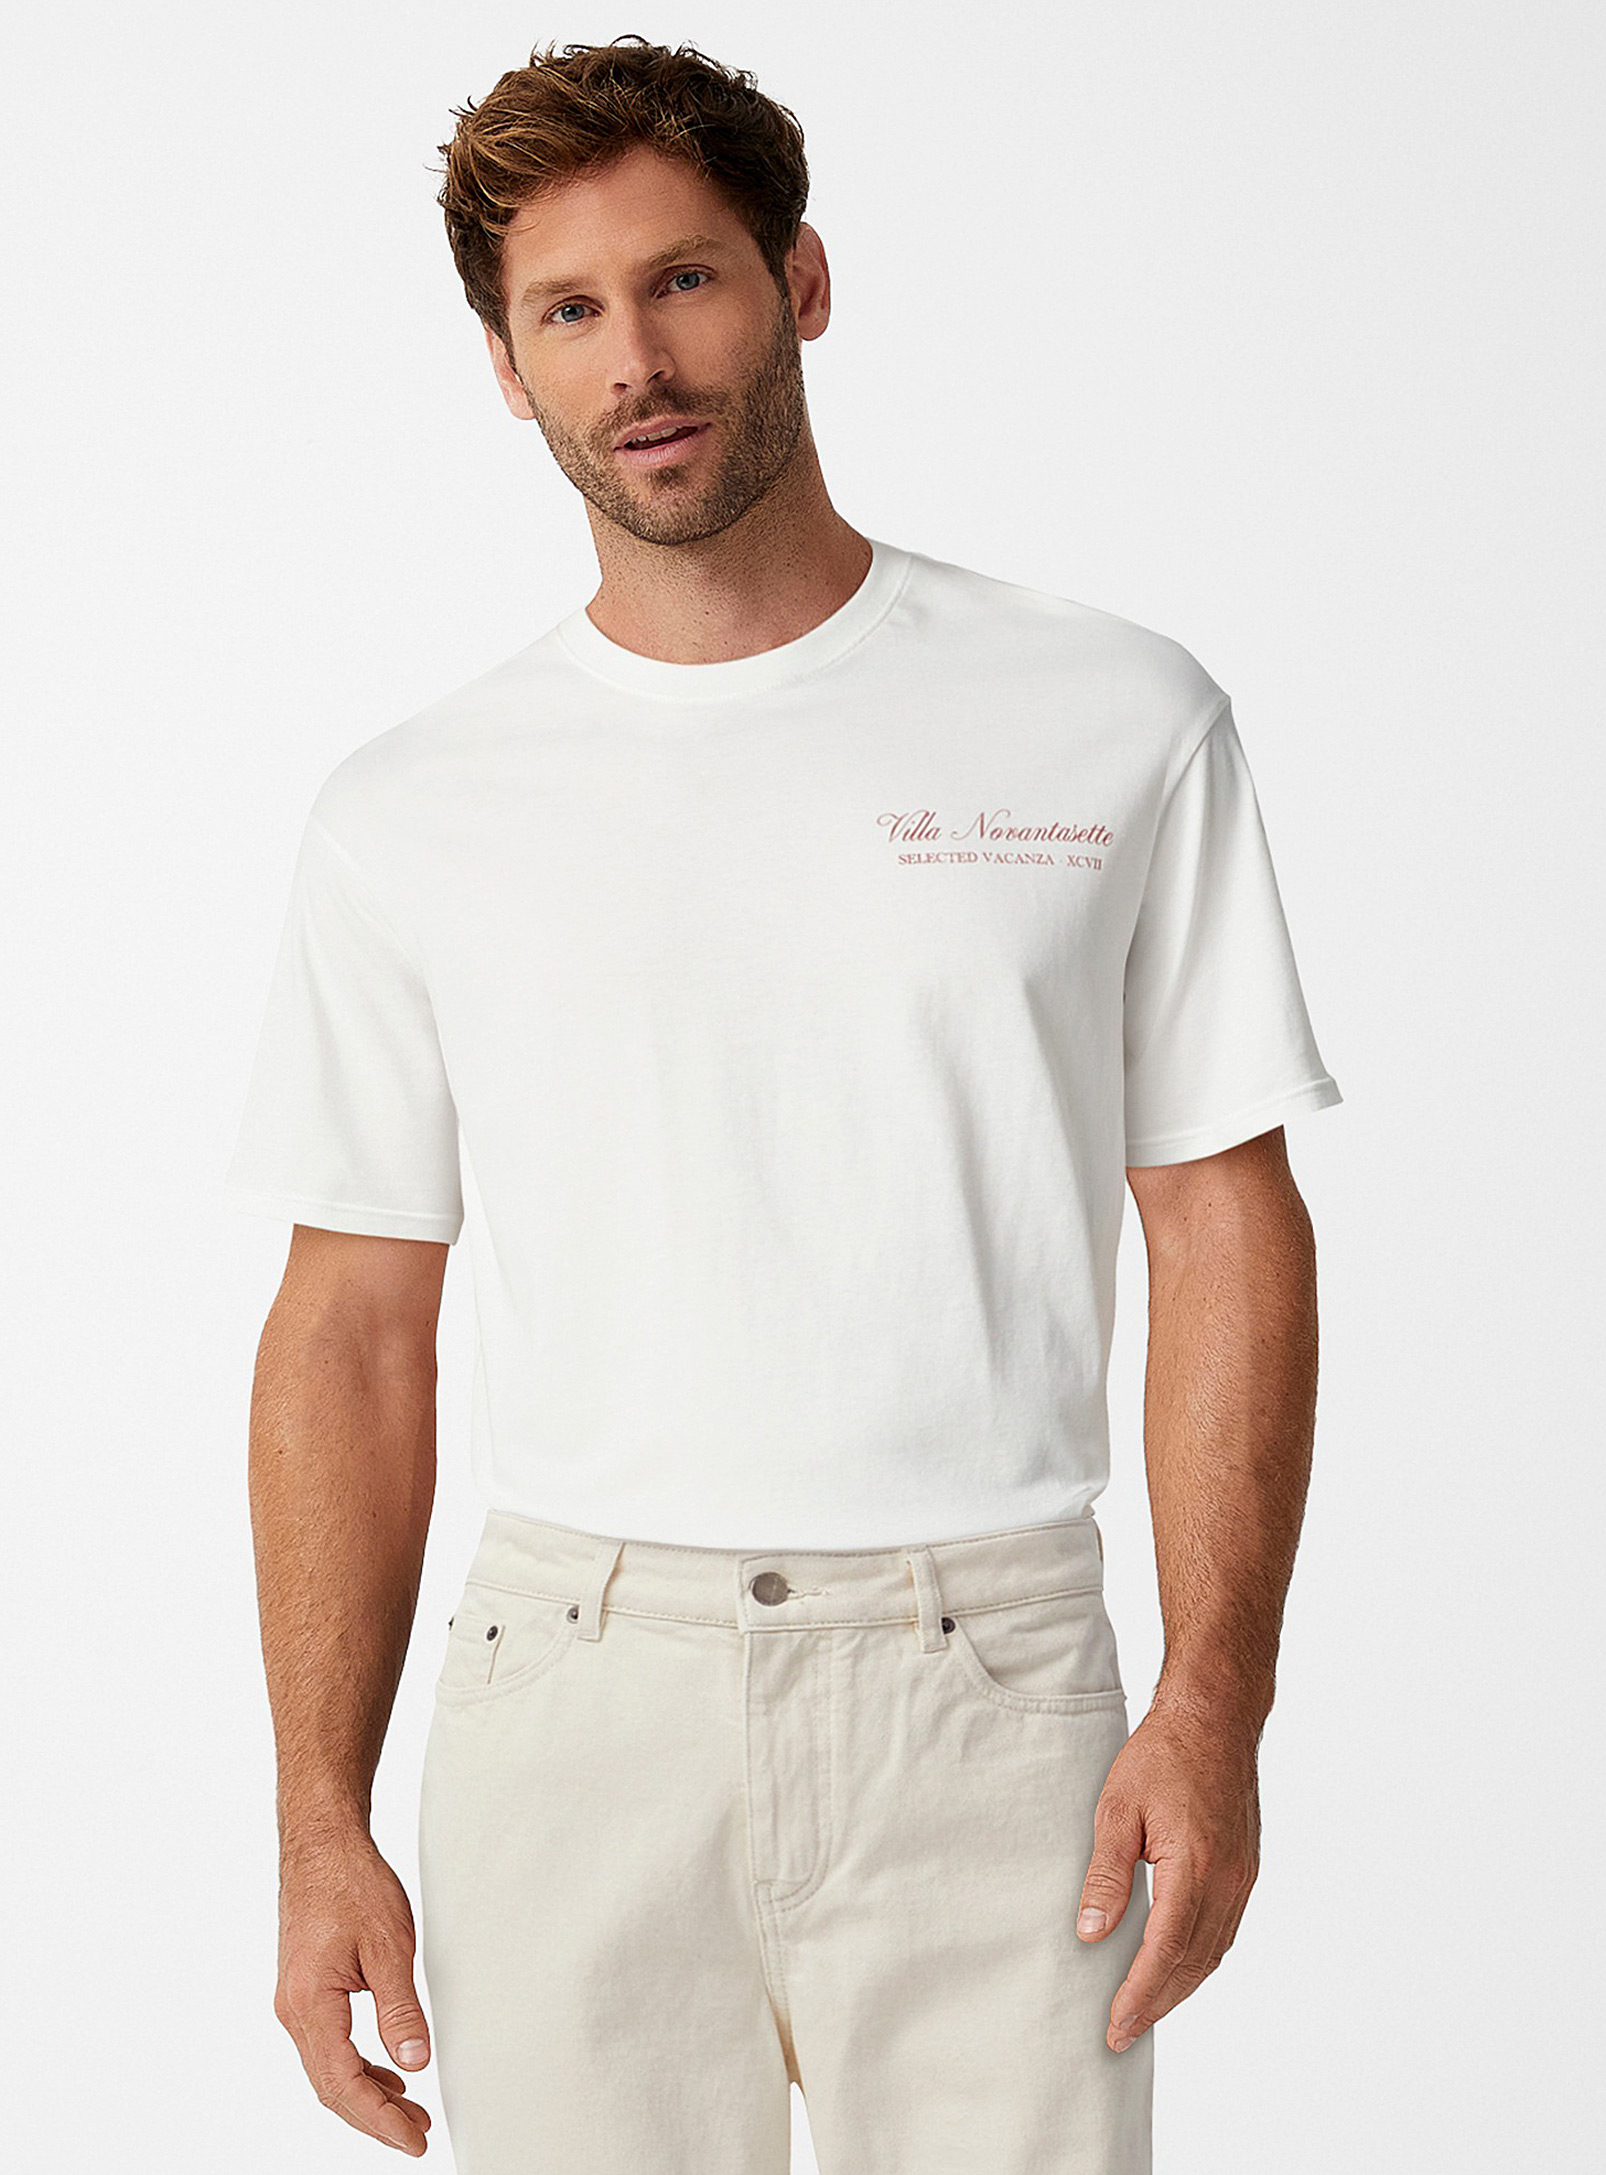 Selected Italian Destinations T-shirt In White